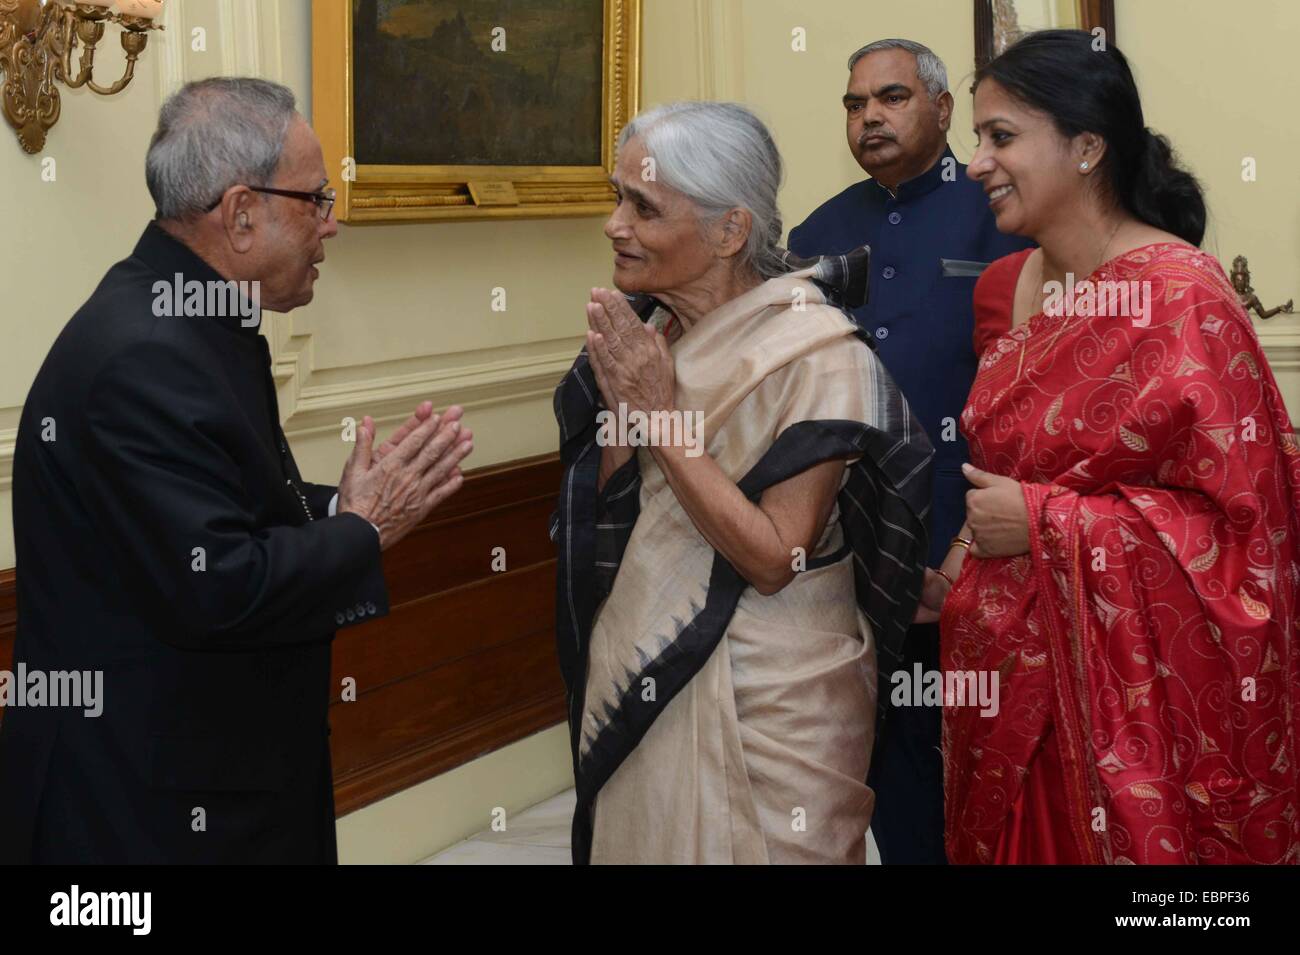 The President of India, Shri Pranab Mukherjee, during the hand-over ceremonry for the first copy of the Coffee Table Book, 'Remembering Baba – Dr. Rajendra Prasad' at Rashtrapati Bhavan. © Bhaskar Mallick/Pacific Press/Alamy Live News Stock Photo